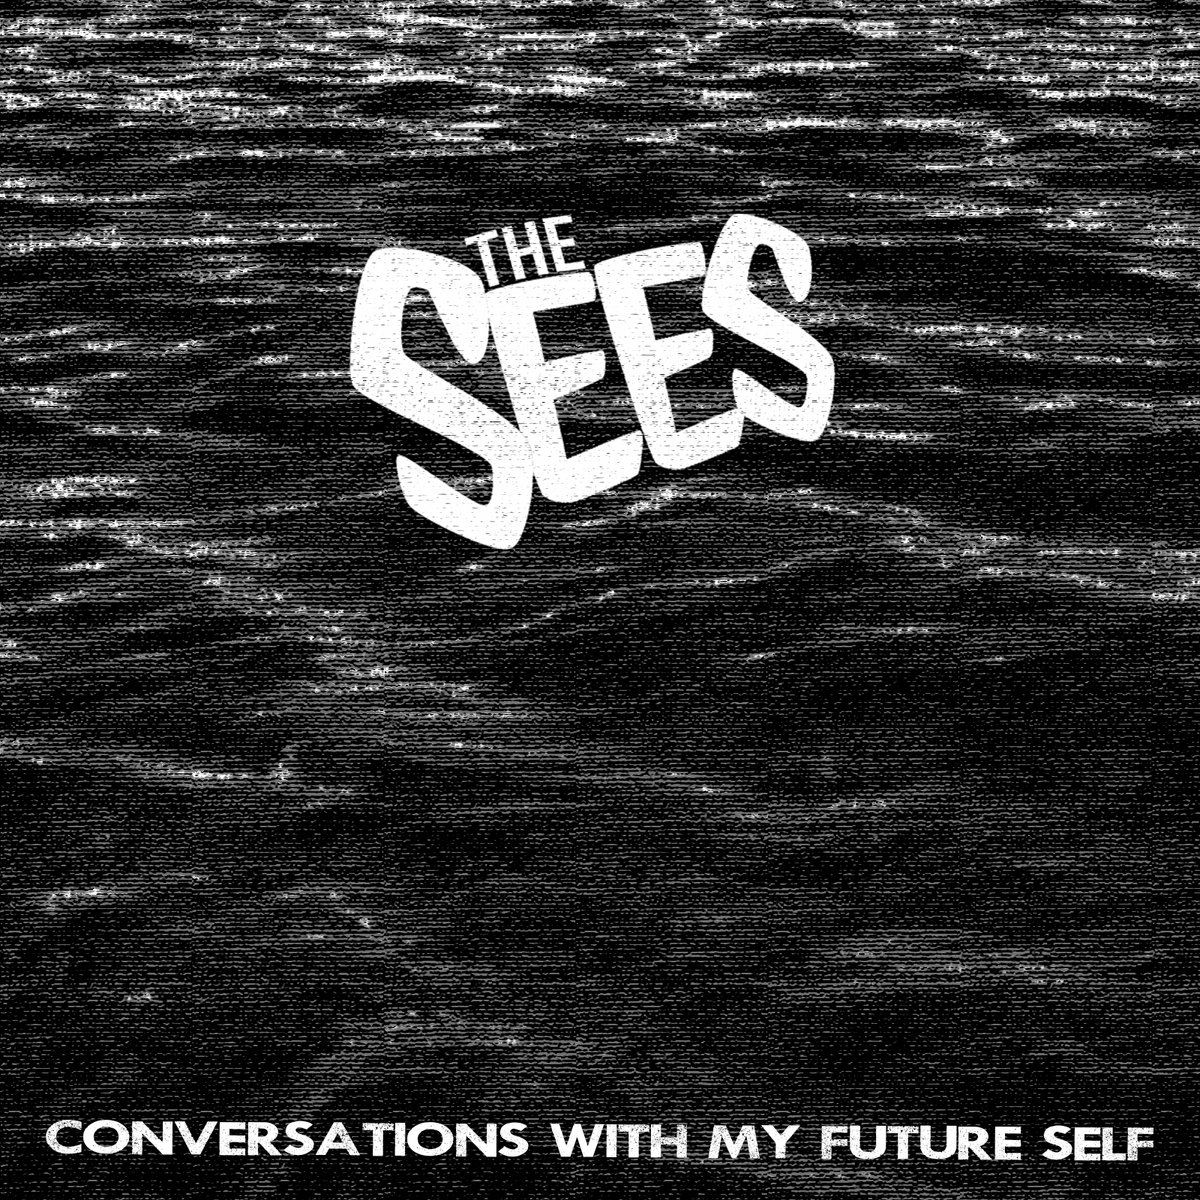 The Sees ‘Conversations With My Future Self’ album artwork